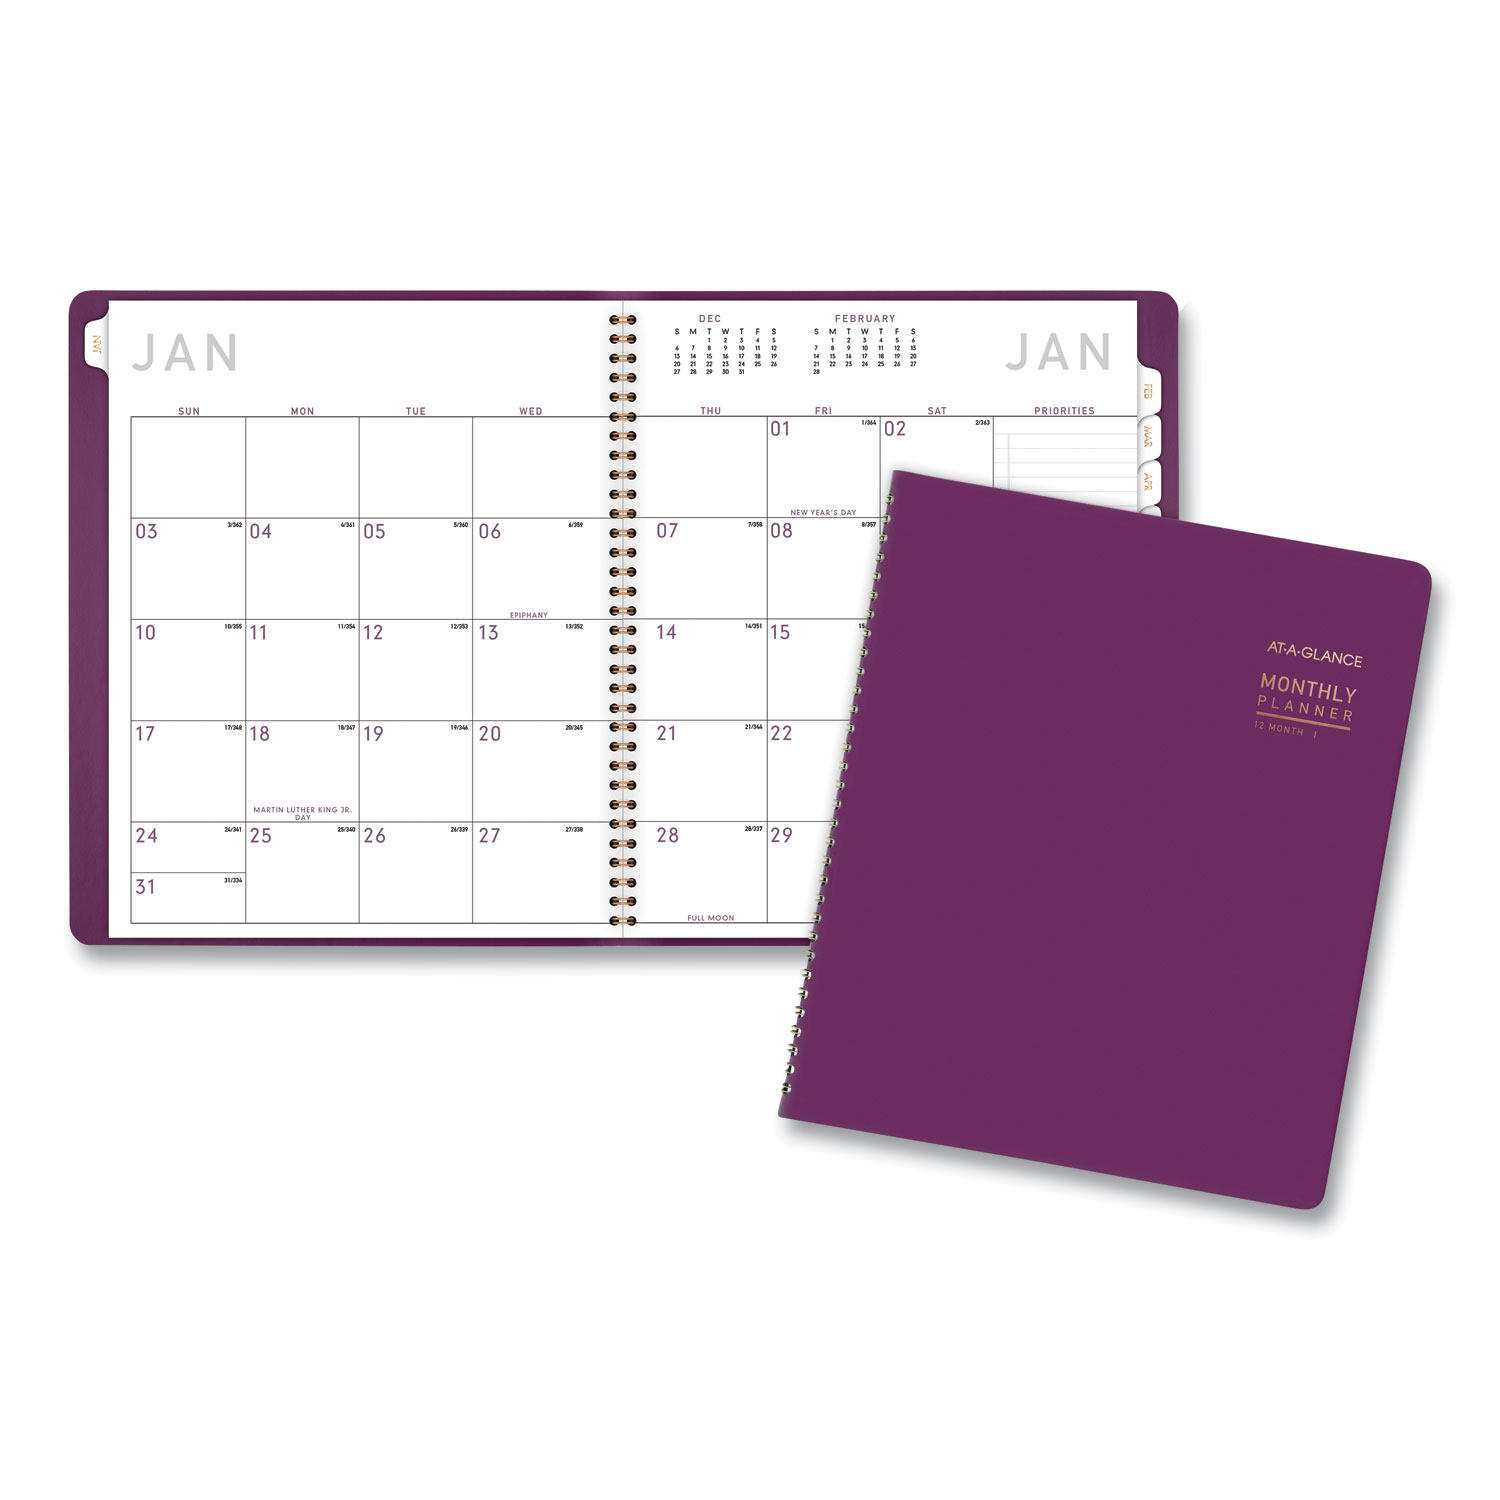  AT-A-GLANCE 70250X59 Contemporary Weekly/Monthly Planner, Column, 11 x 9, Graphite Cover, 2020 (AAG70250X59) 